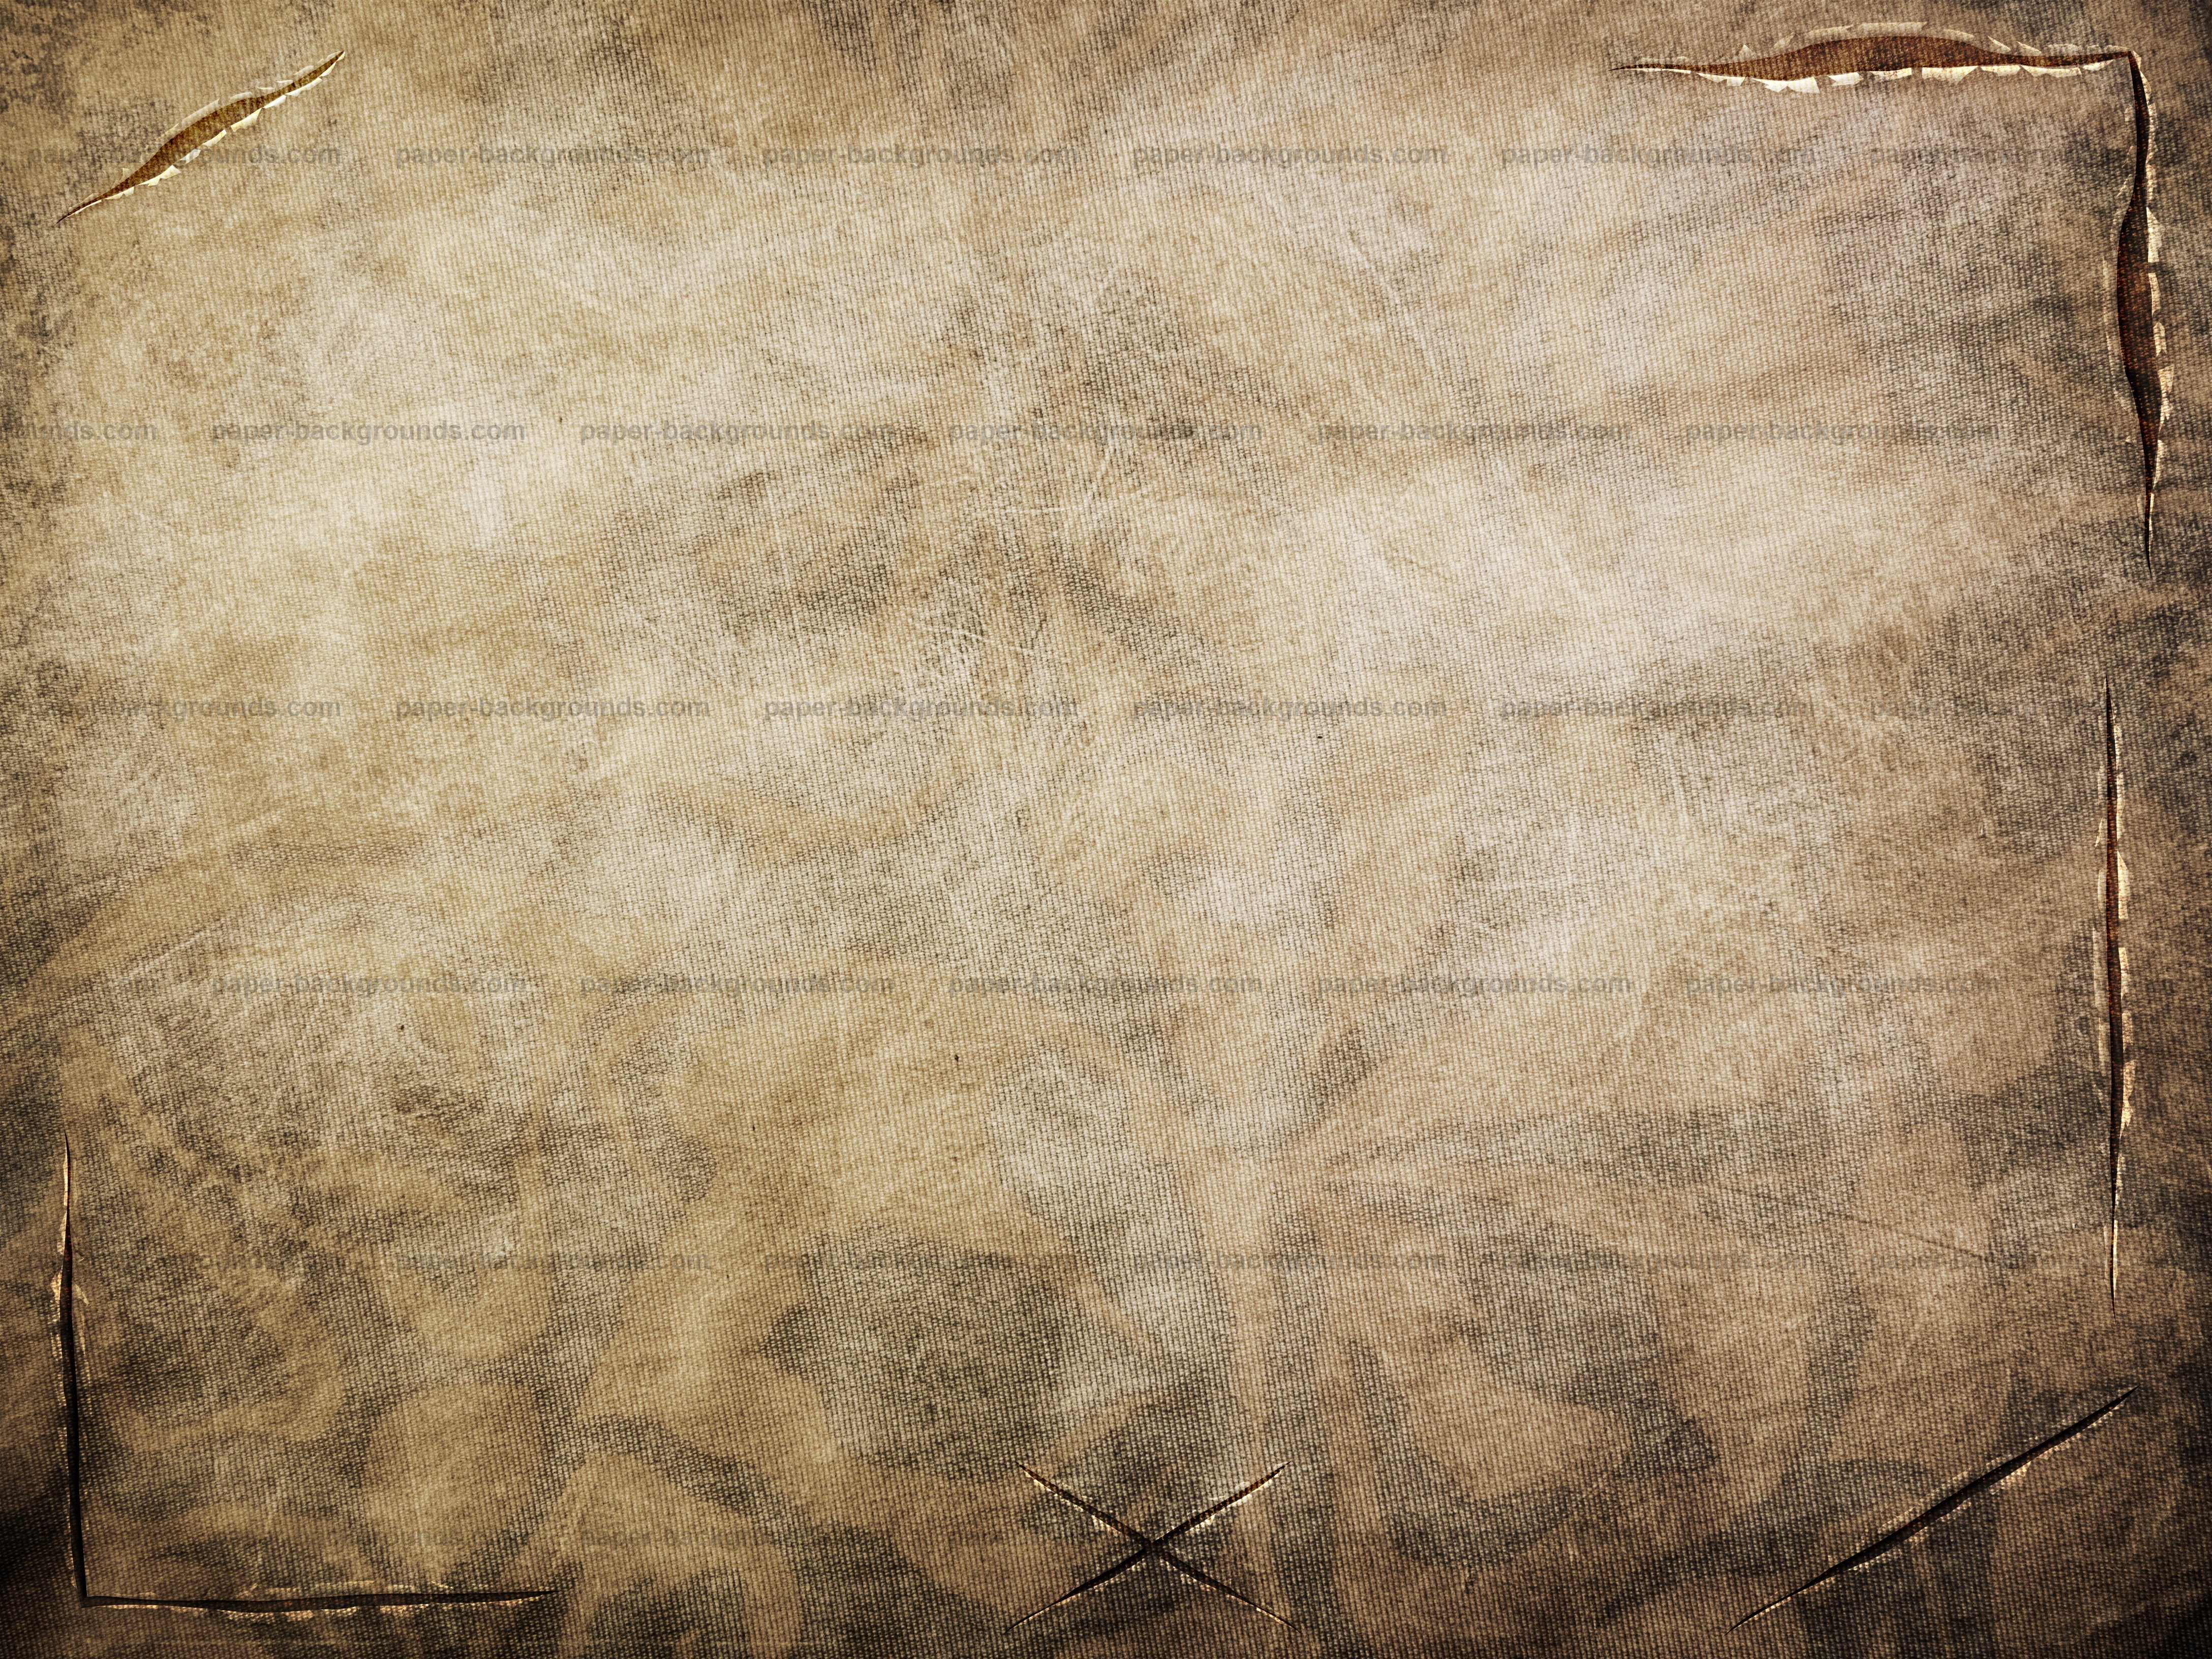 Paper Backgrounds | Vintage Brown Fabric Texture with Tears